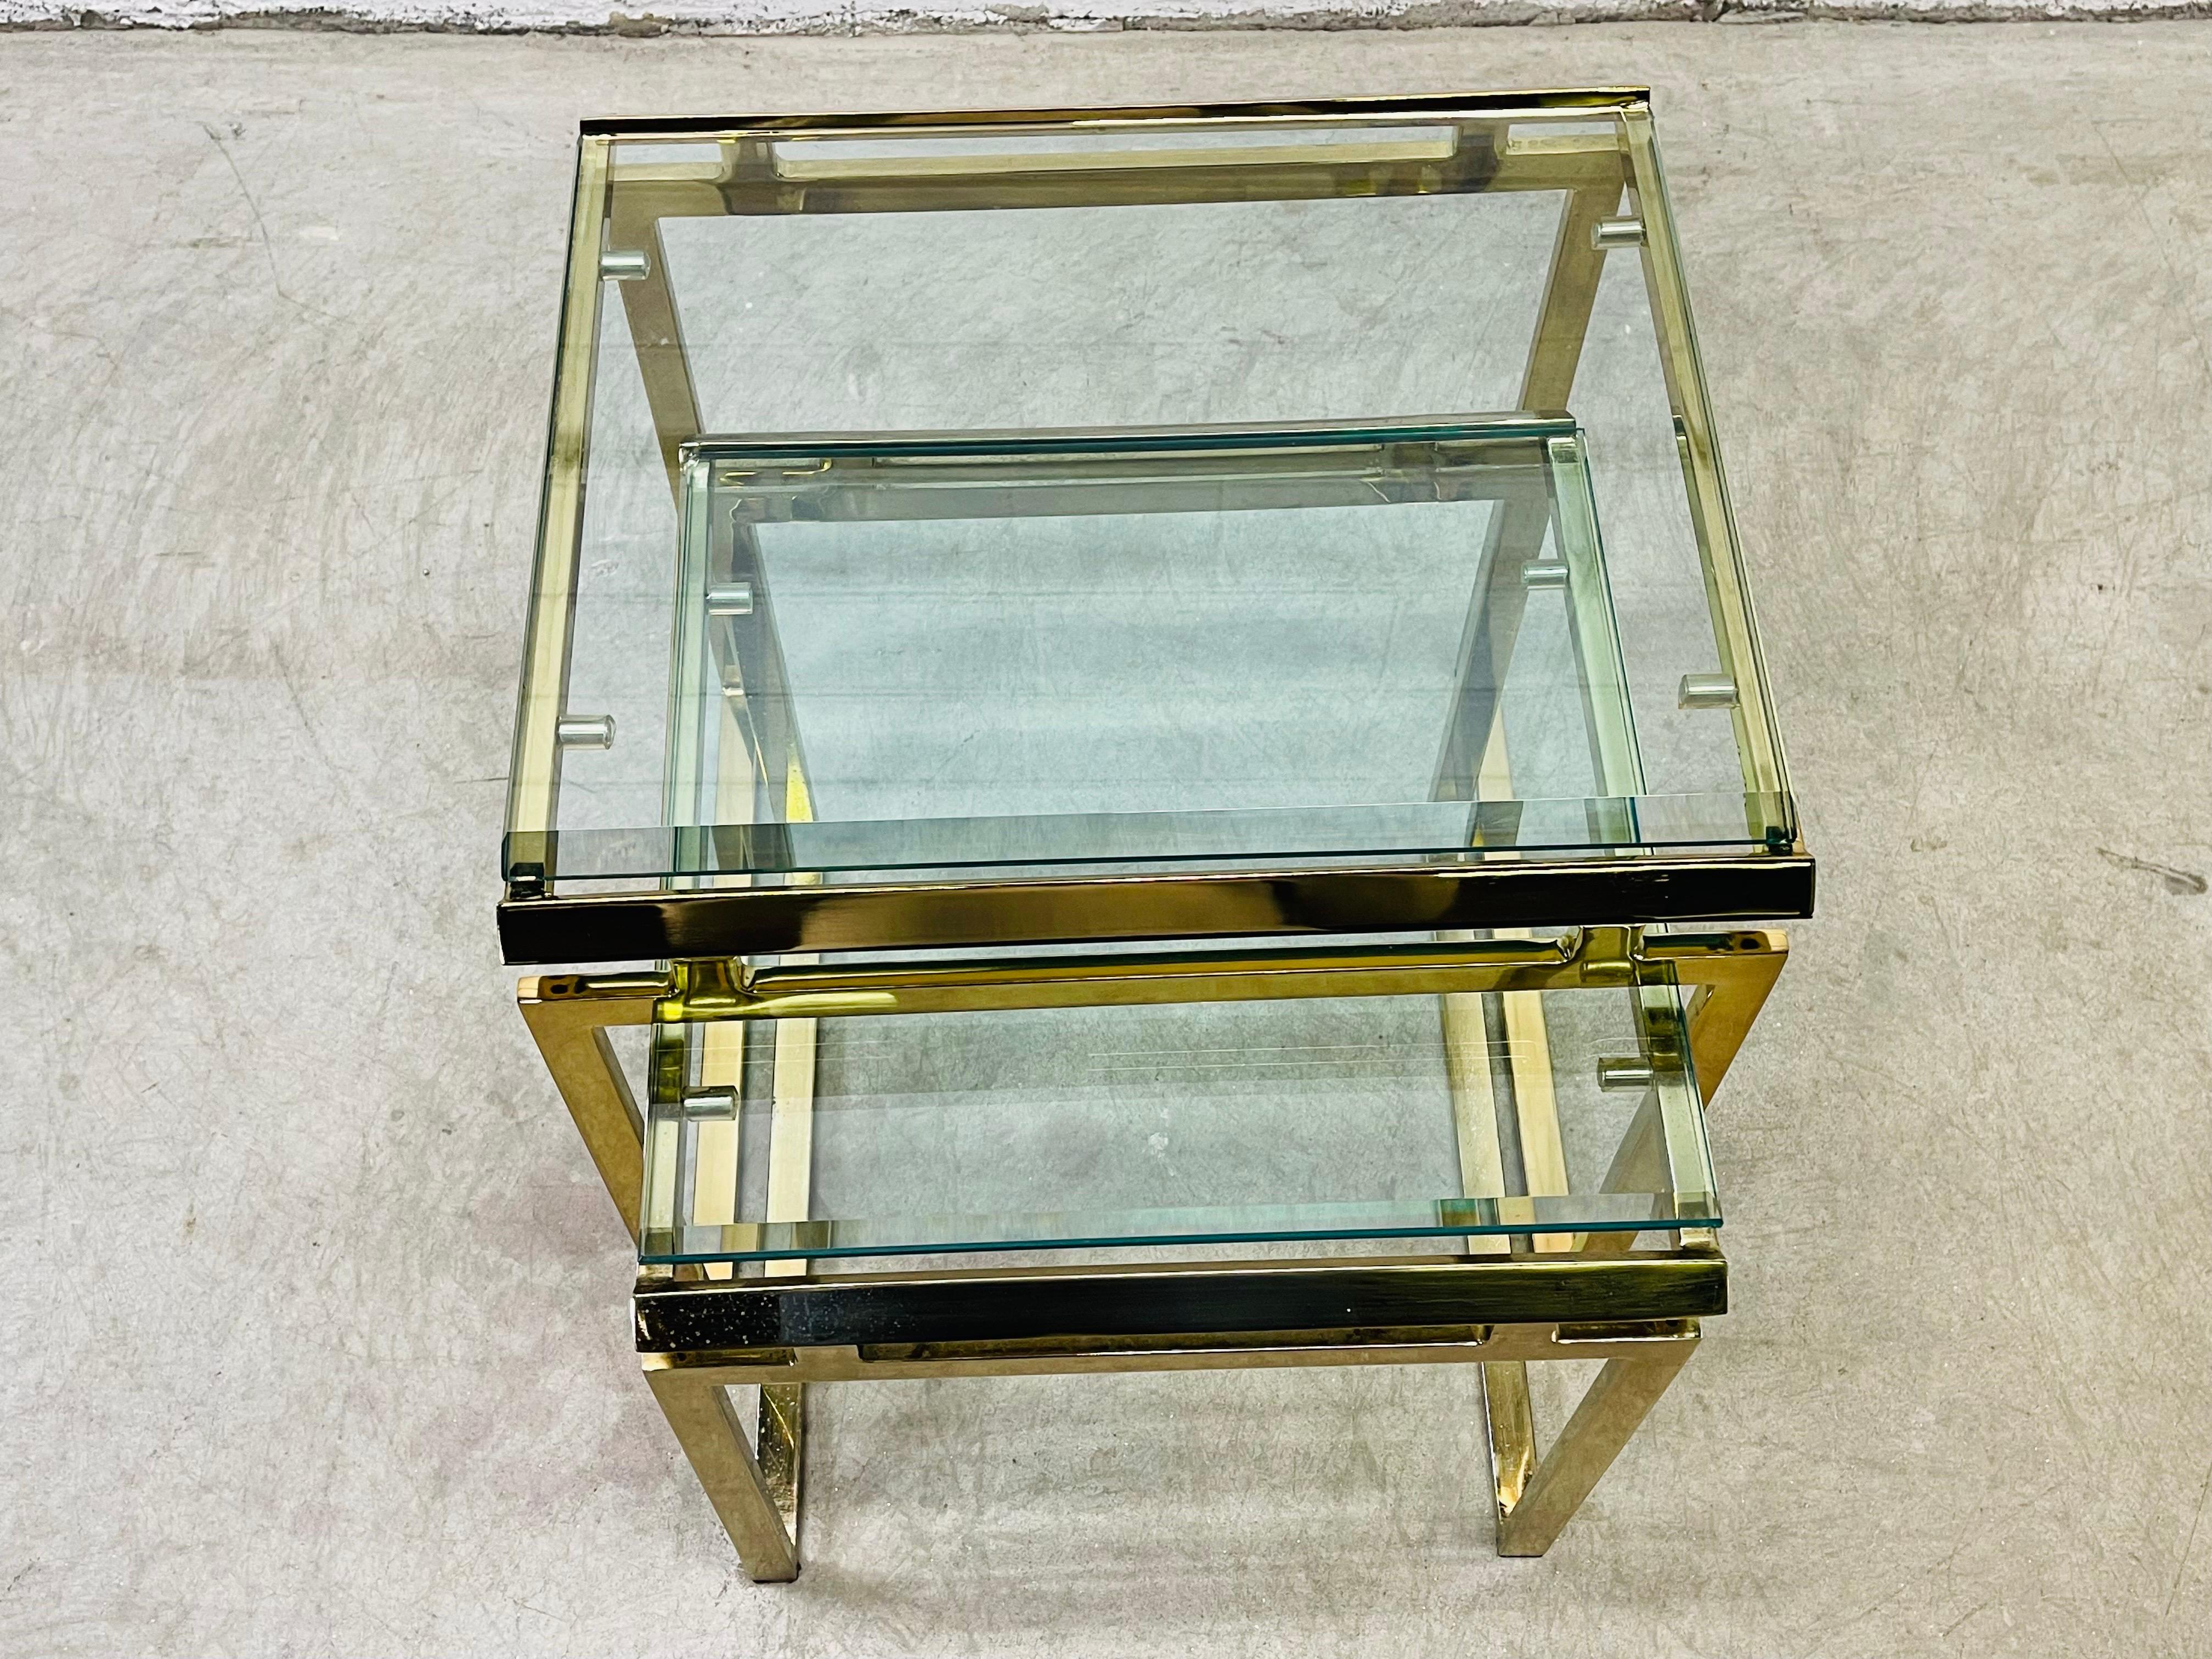 Vintage 1980s pair of brass and glass top nesting tables. The tables are on a thick brass frame with beveled glass tops. The smaller table measures 17” L x 18” D x 17.5” H. Light wear and tarnish from age and use. No chips to the glass. No marks.